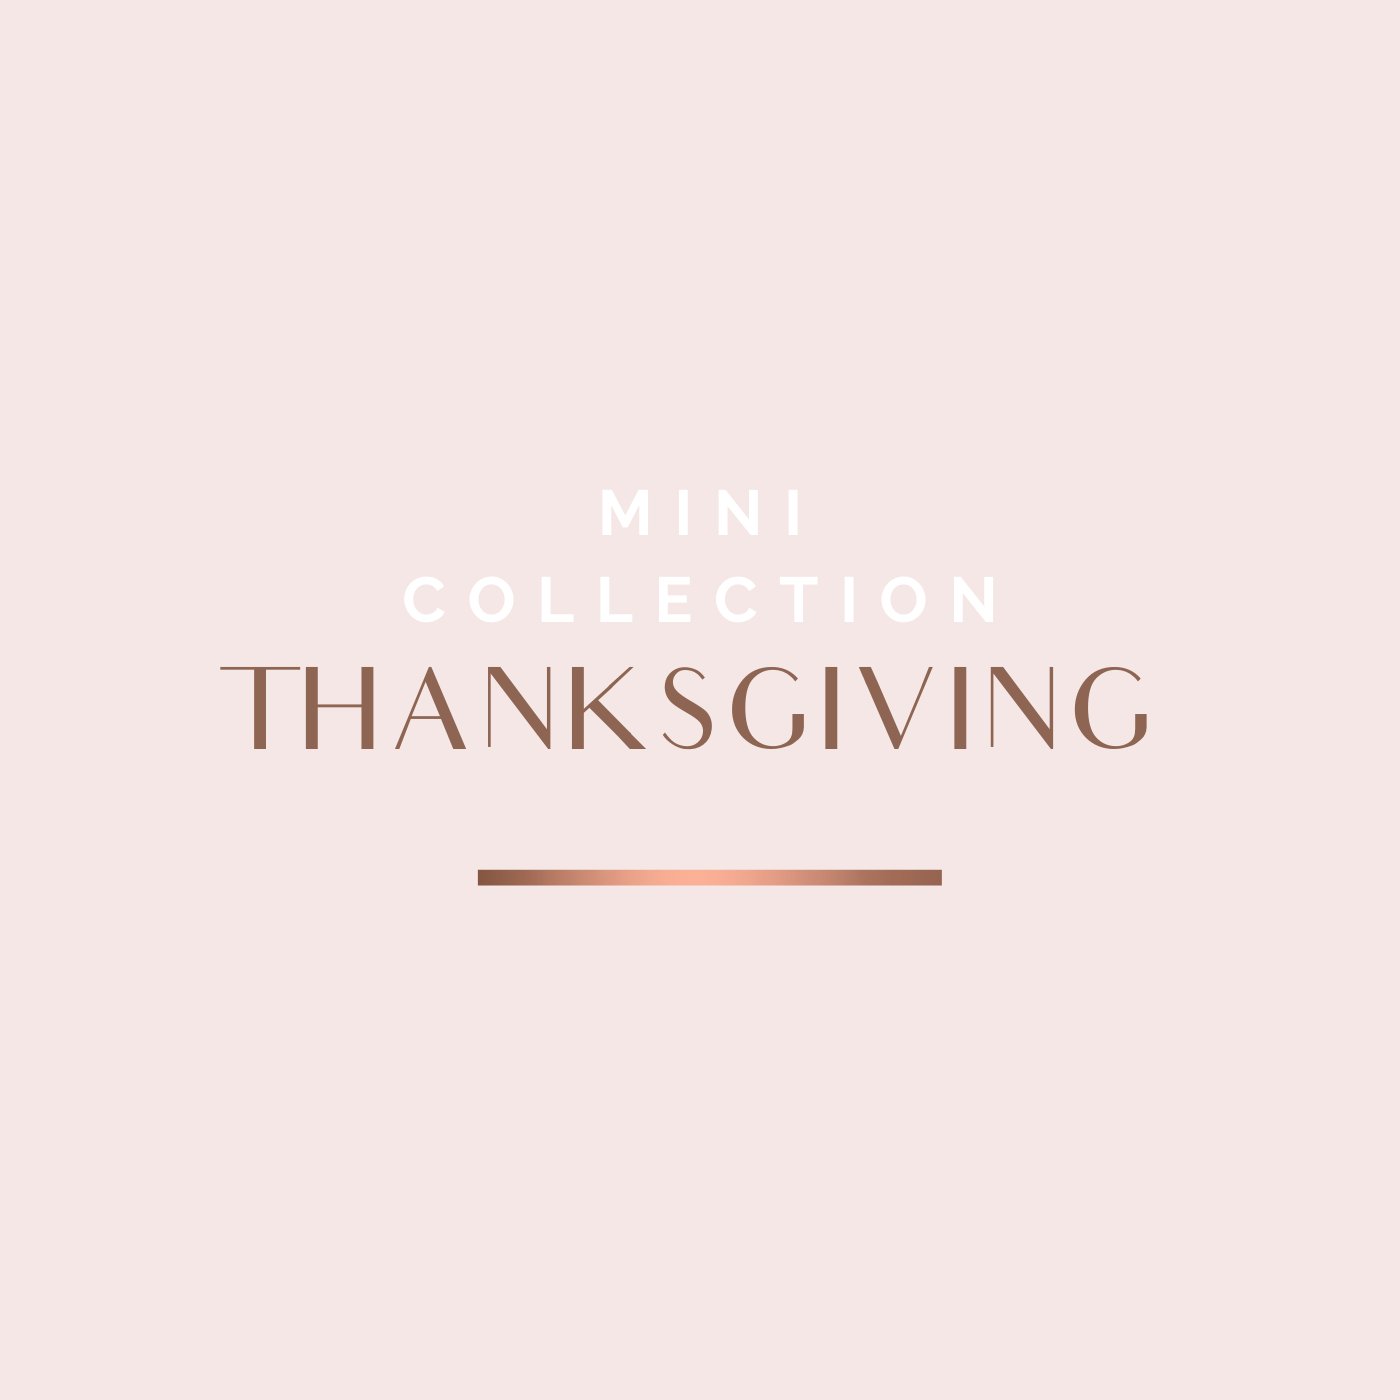 Thanksgiving Mini Collection